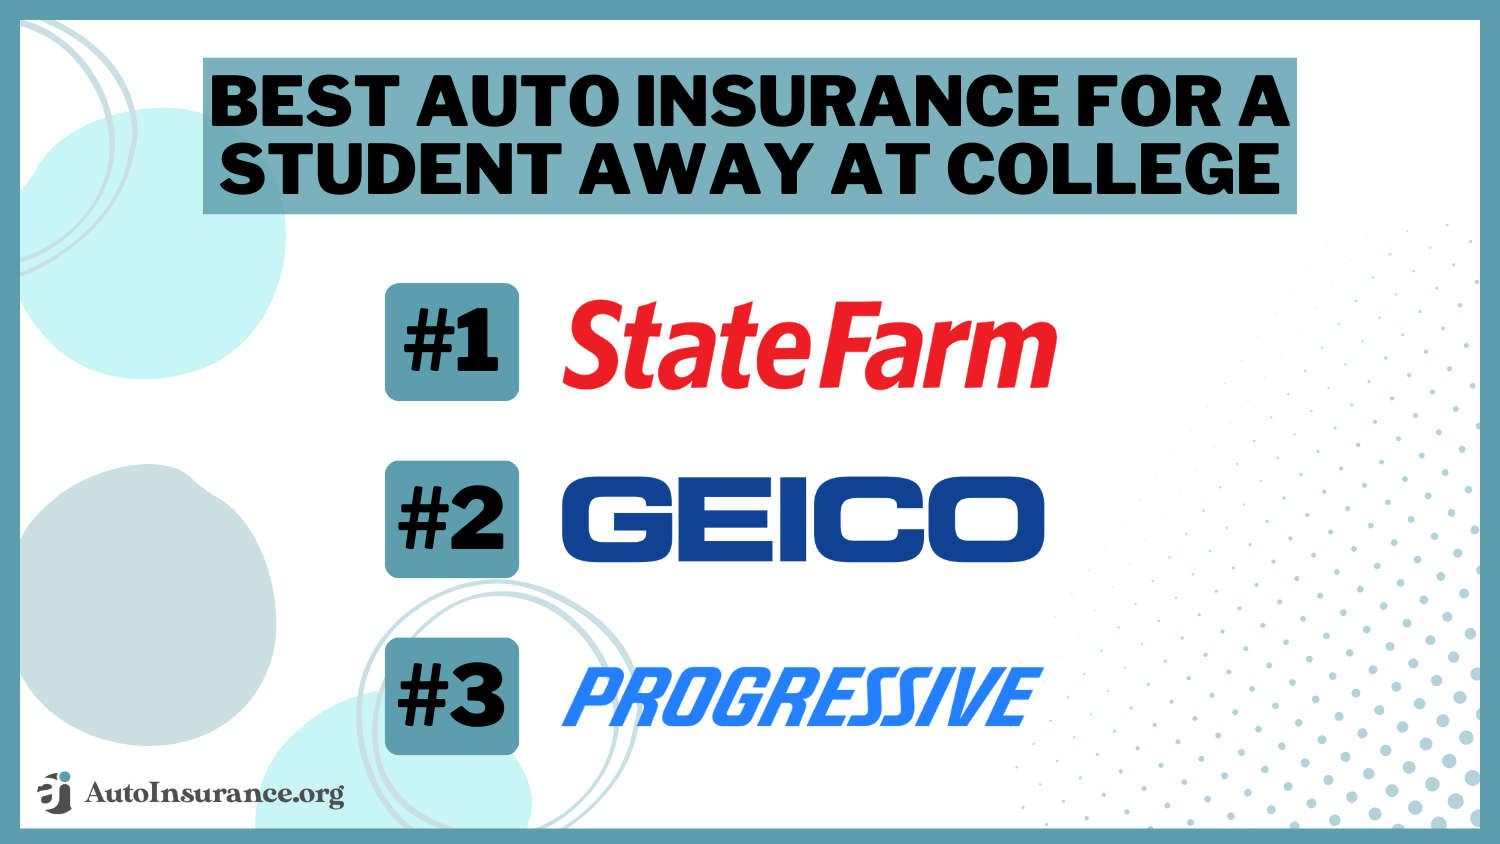 Best Auto Insurance for a Student Away at College: State Farm, Geico, Progressive